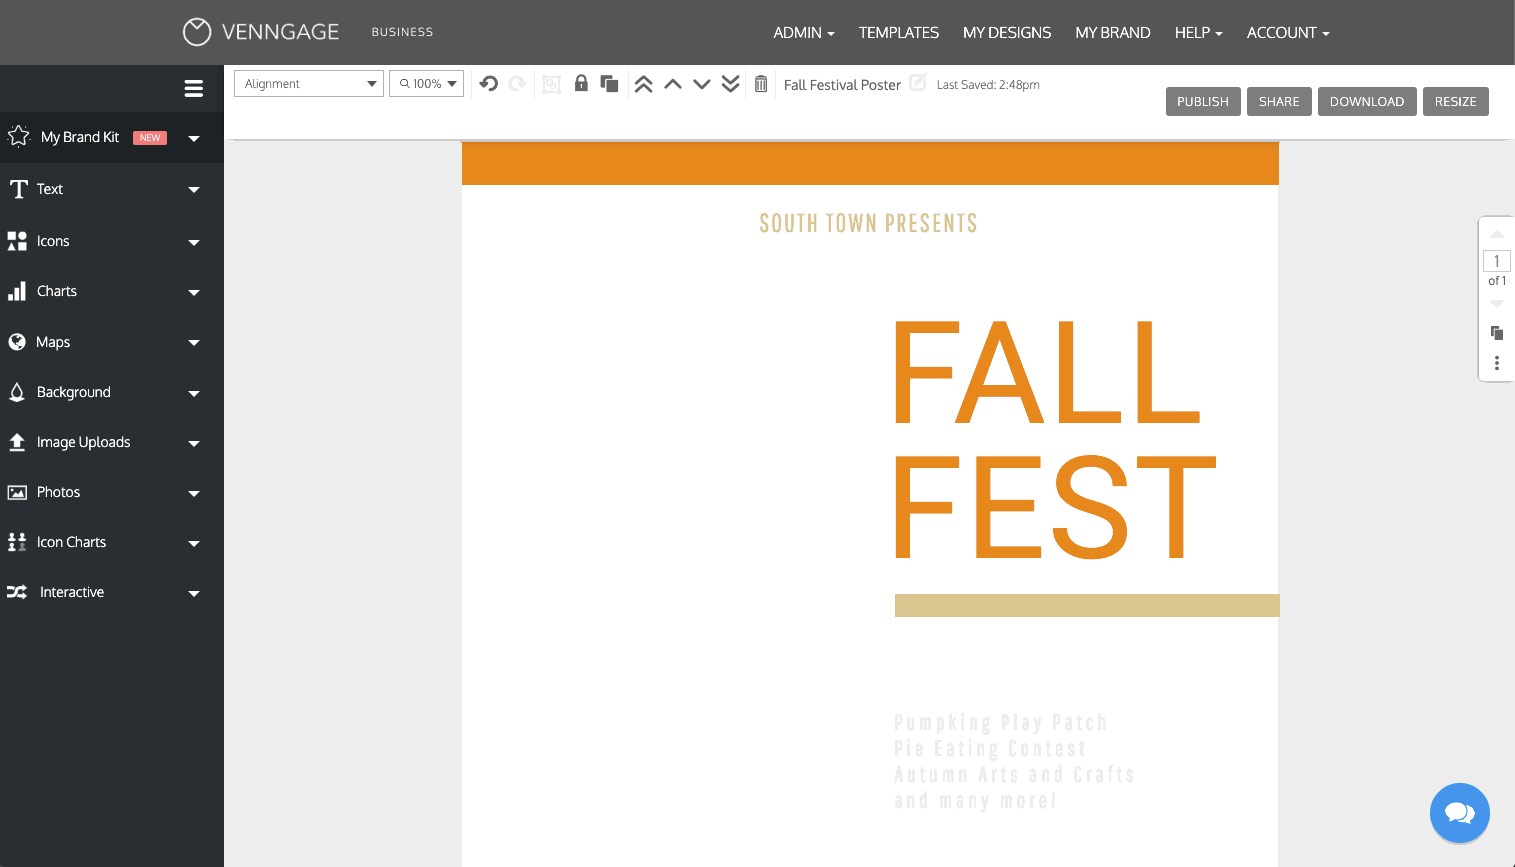 A design canvas in the Venngage Editor shows a cream poster with the text 'South Town Presents Fall Fest' in shades of orange, with orange decorative accents. The user clicks 'Photos' in the left sidebar and types 'fall' into the search bar. The search returns multiple images of trees or landscapes with red, orange and yellow leaves. The user double-clicks a photo that shows a bright yellow leaf in close-up against a background of a forest trail with dark trees and leaves littering the ground. The user drags the photo into position to the right of the 'Fall Fest' heading, aligning it with the other elements on the poster.